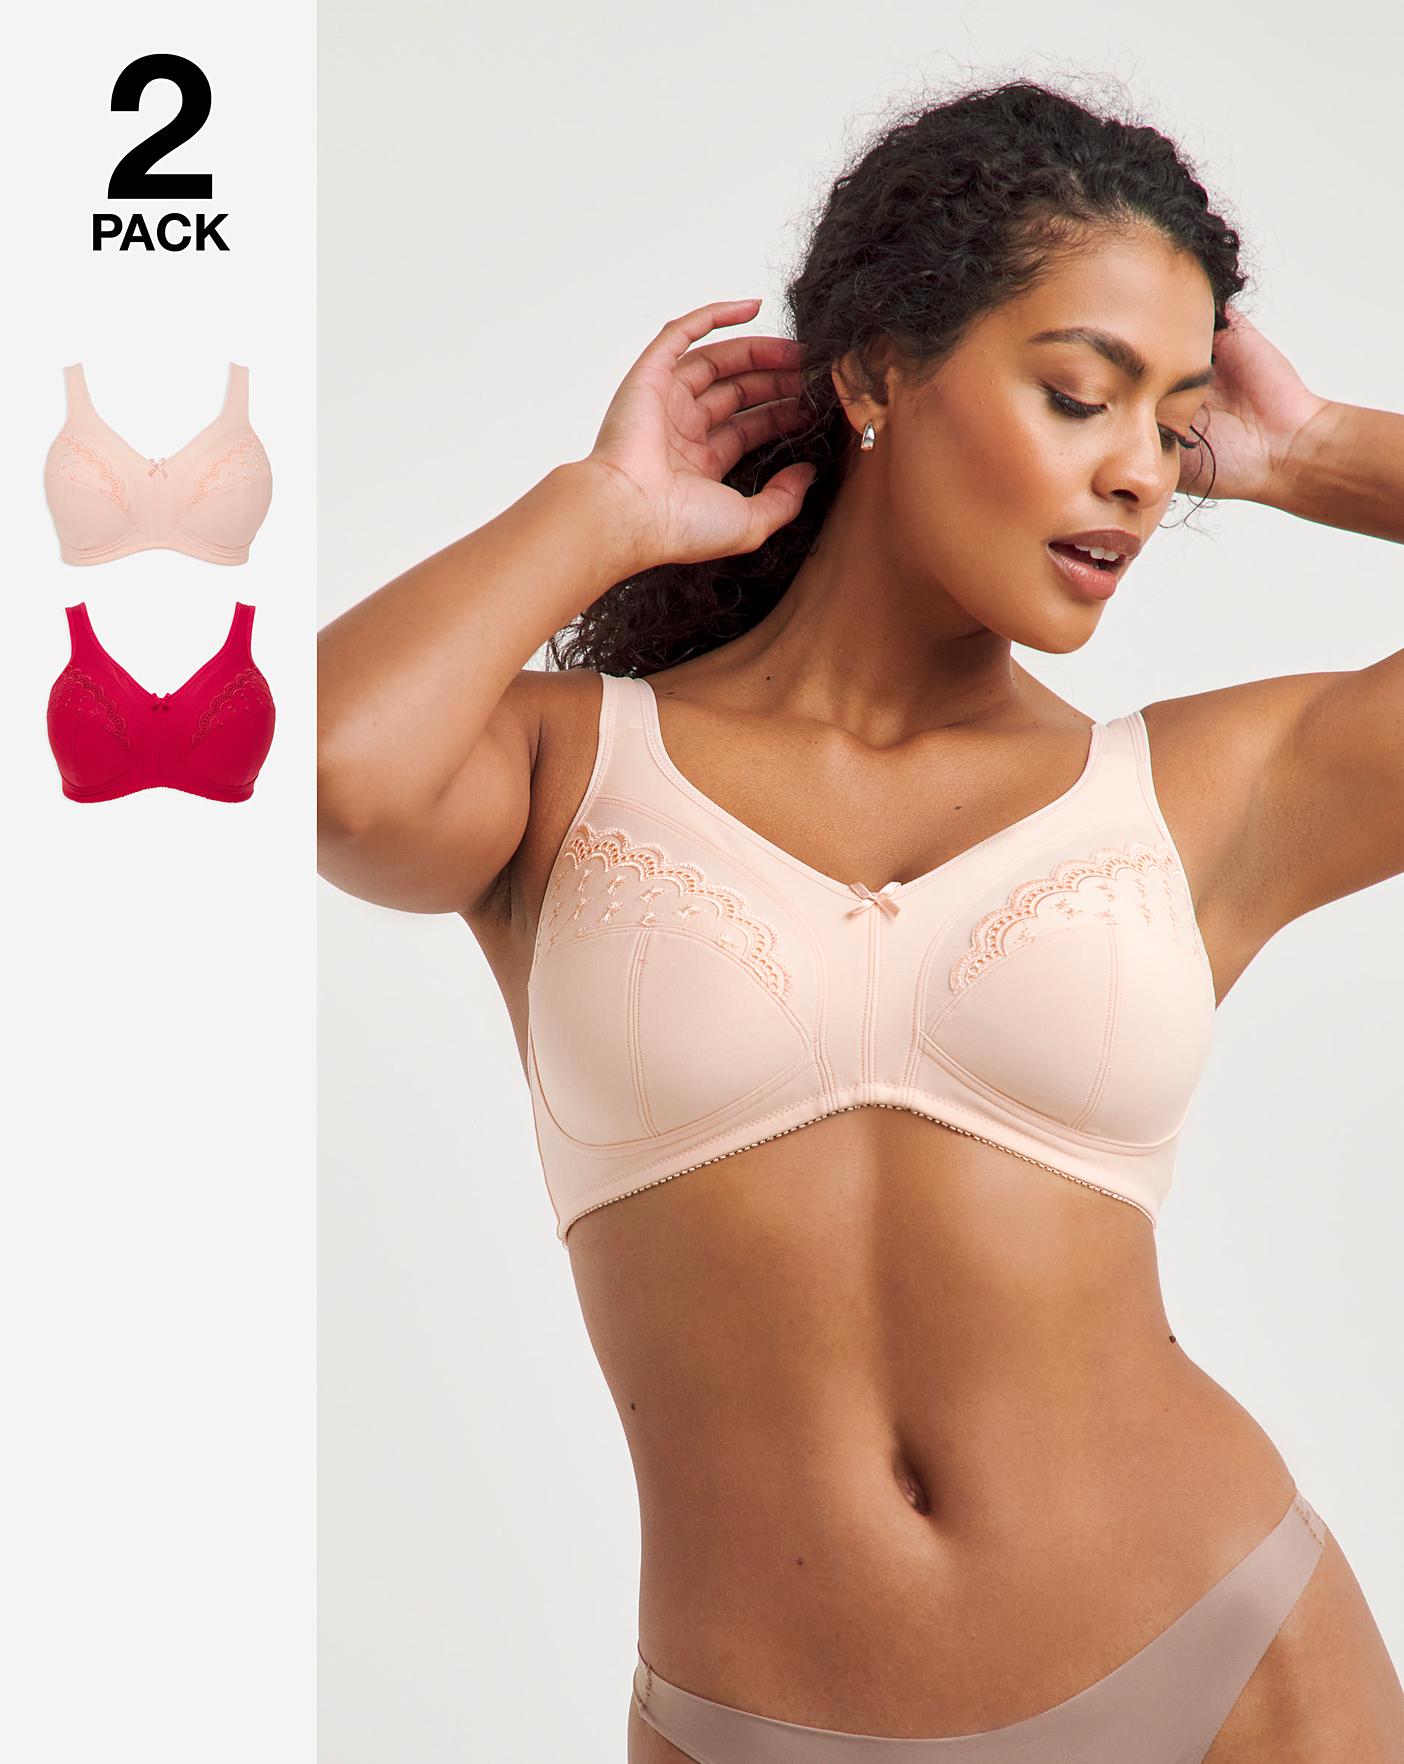 Pack of 2 Non-Wired Bras with Straps